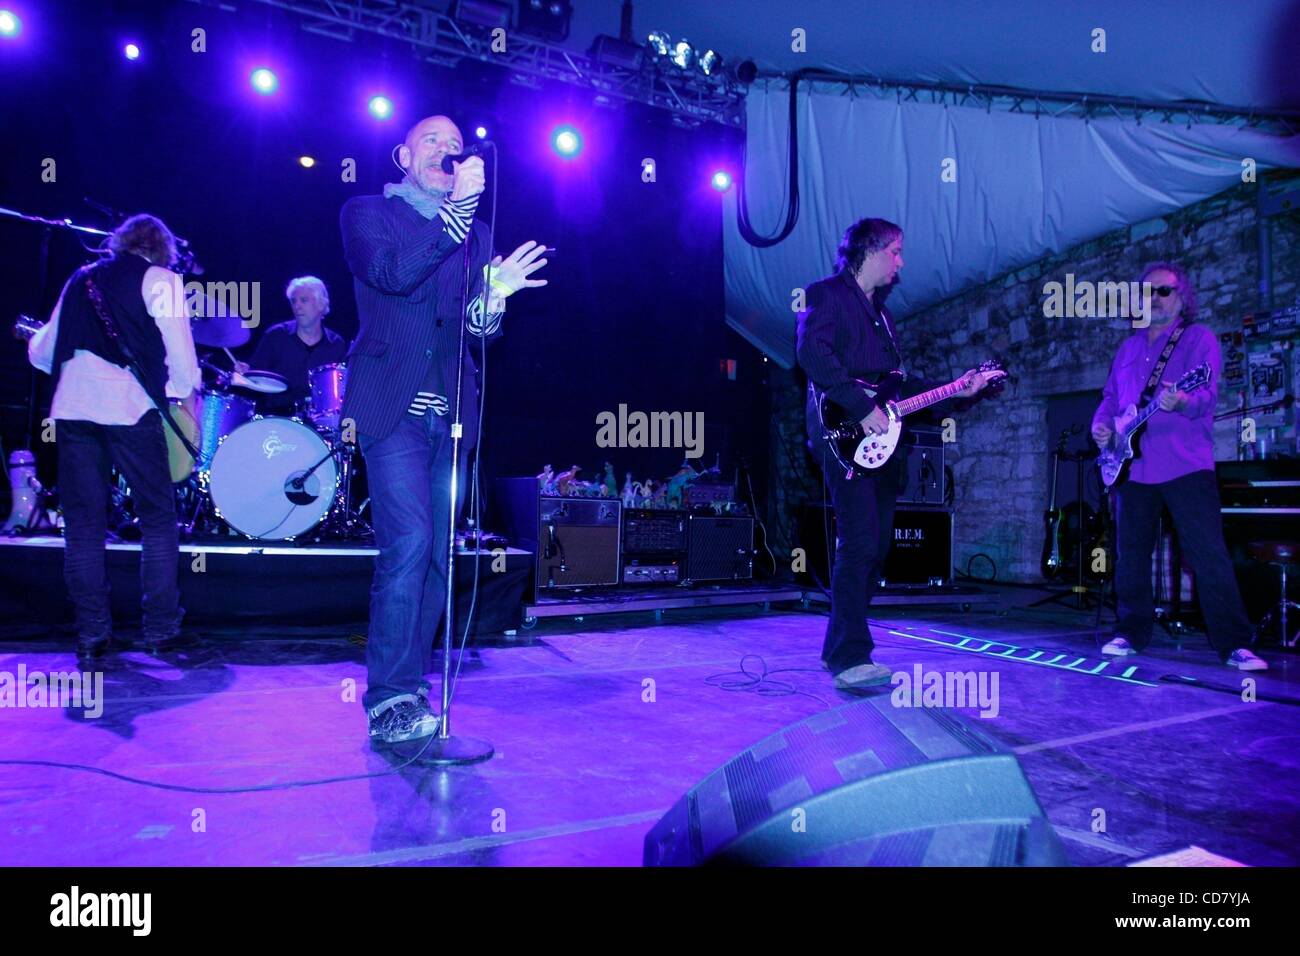 Mar 12, 2008 - Austin, Texas, USA - MICHAEL STIPE and R.E.M. at Stubbs BBQ performing in Austin Texas on March 12, 2008 during SXSW 2008.  (Credit Image: Â© Aviv Small/ZUMA Press) Stock Photo